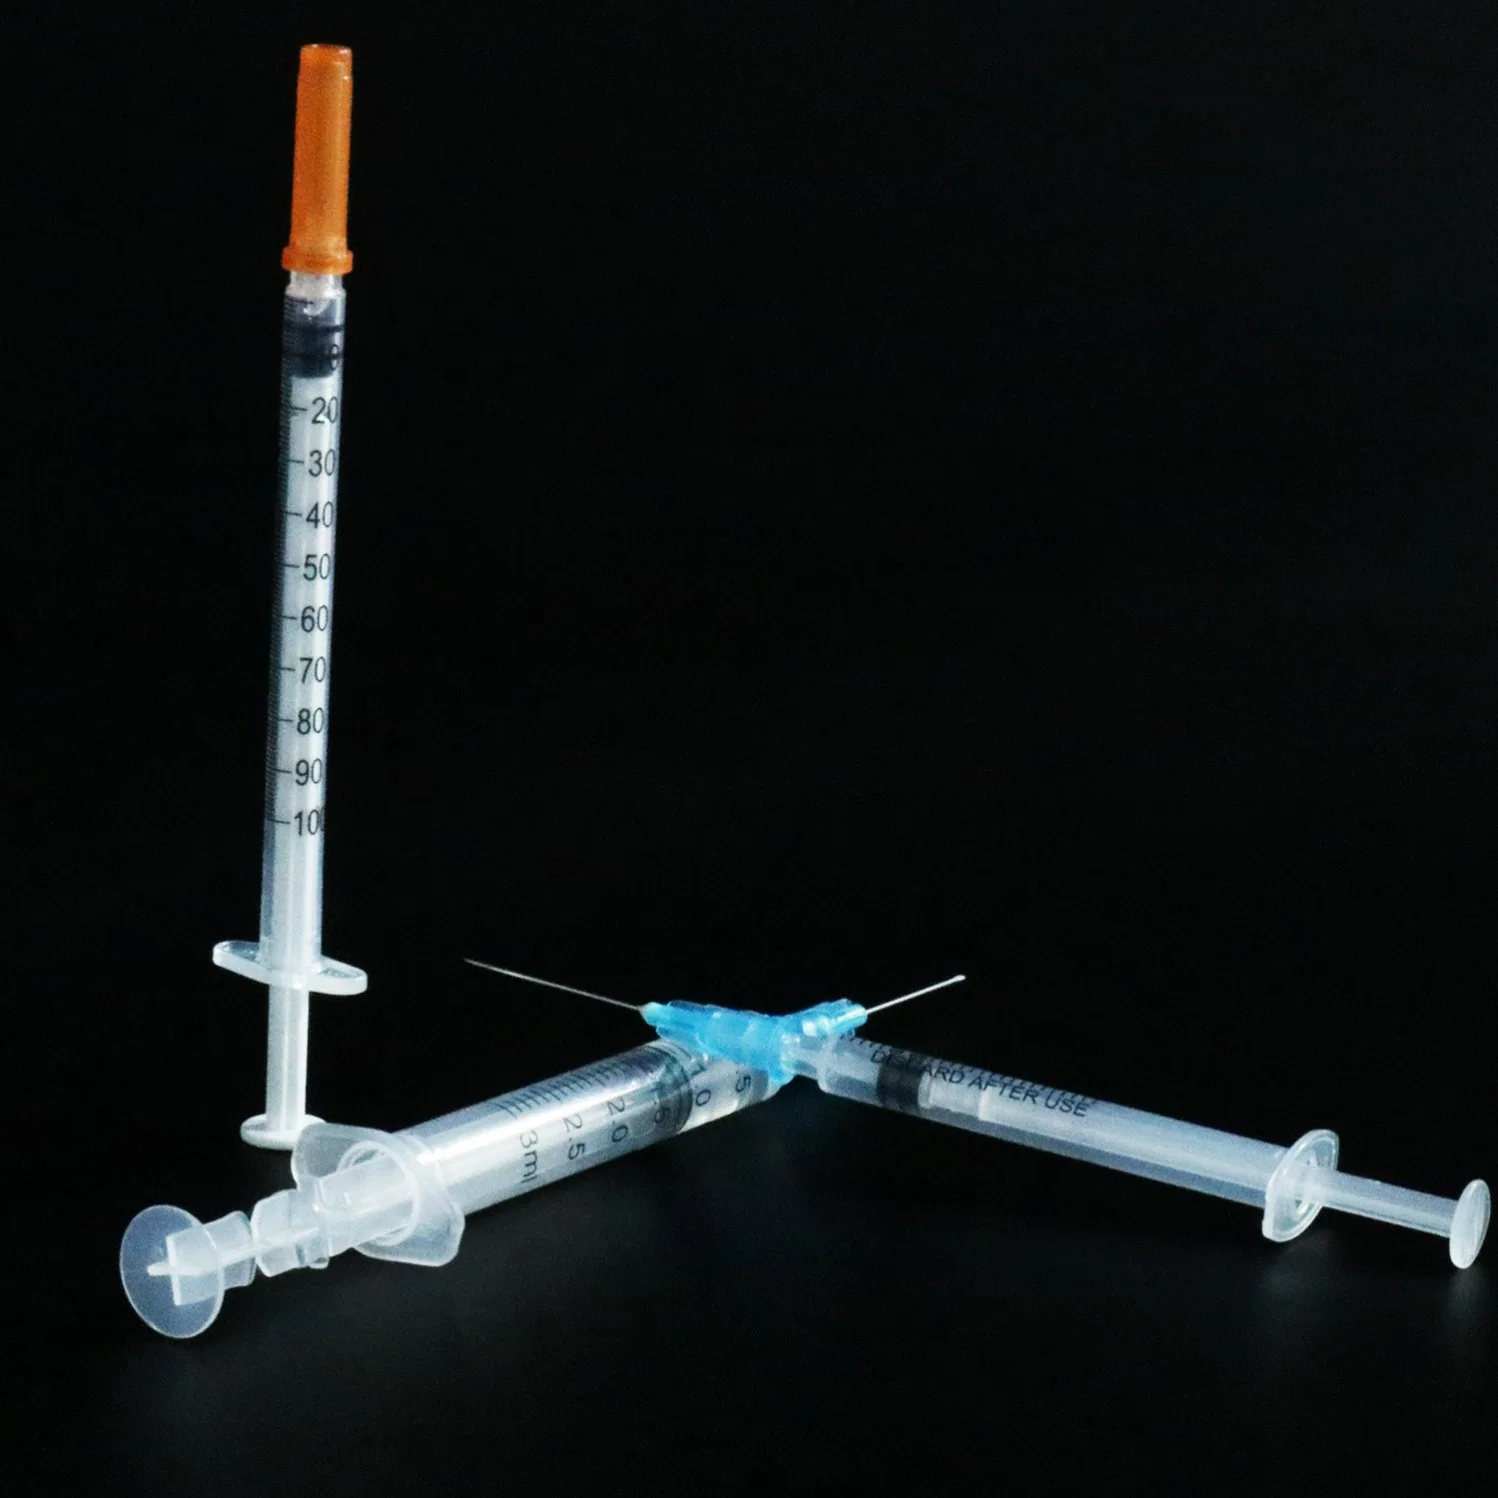 Siny Medical Supplies Disposable Safety Injection Insulin Sterile Syringe Vaccine Syringe